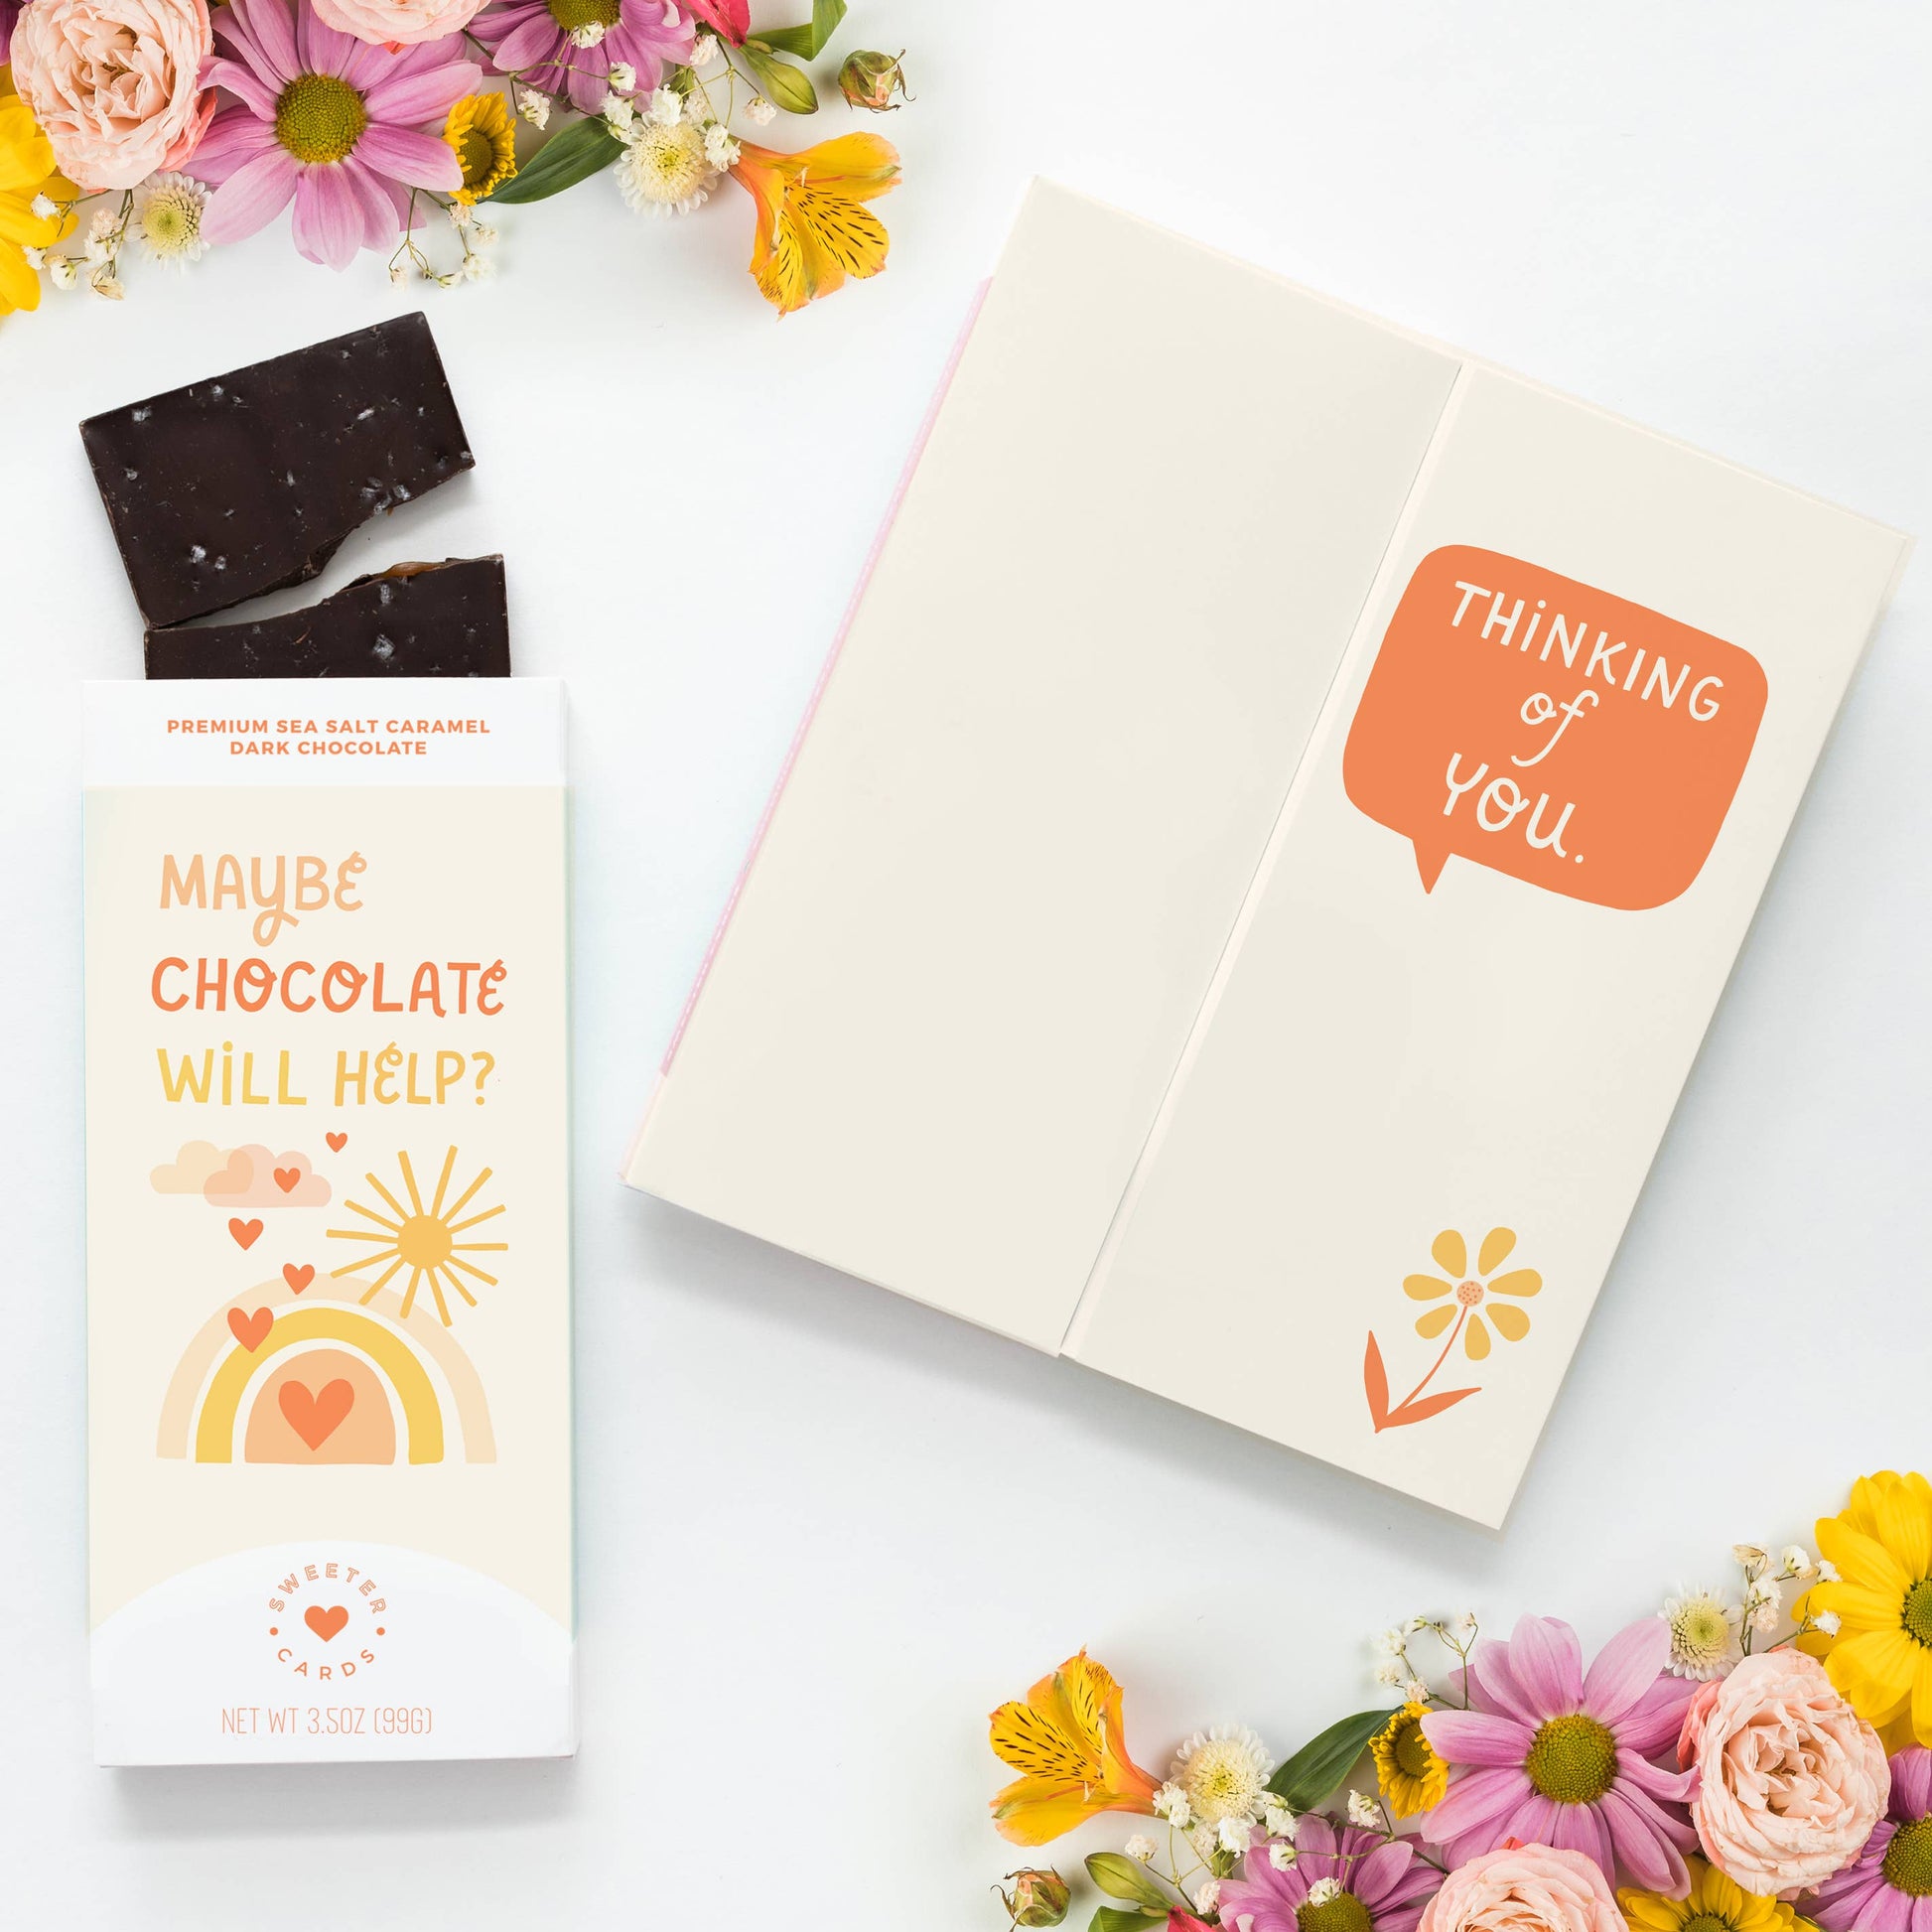 Sweeter Card - Chocolate Bar + Greeting Card in ONE! - Maybe Chocolate Will Help? for "Thinking of You," Grief, Get Well Soon, + other scenarios where a loved one may be struggling  Sweeter Cards Chocolate Bar + Greeting Card in ONE!   -better made easy-eco-friendly-sustainable-gifting